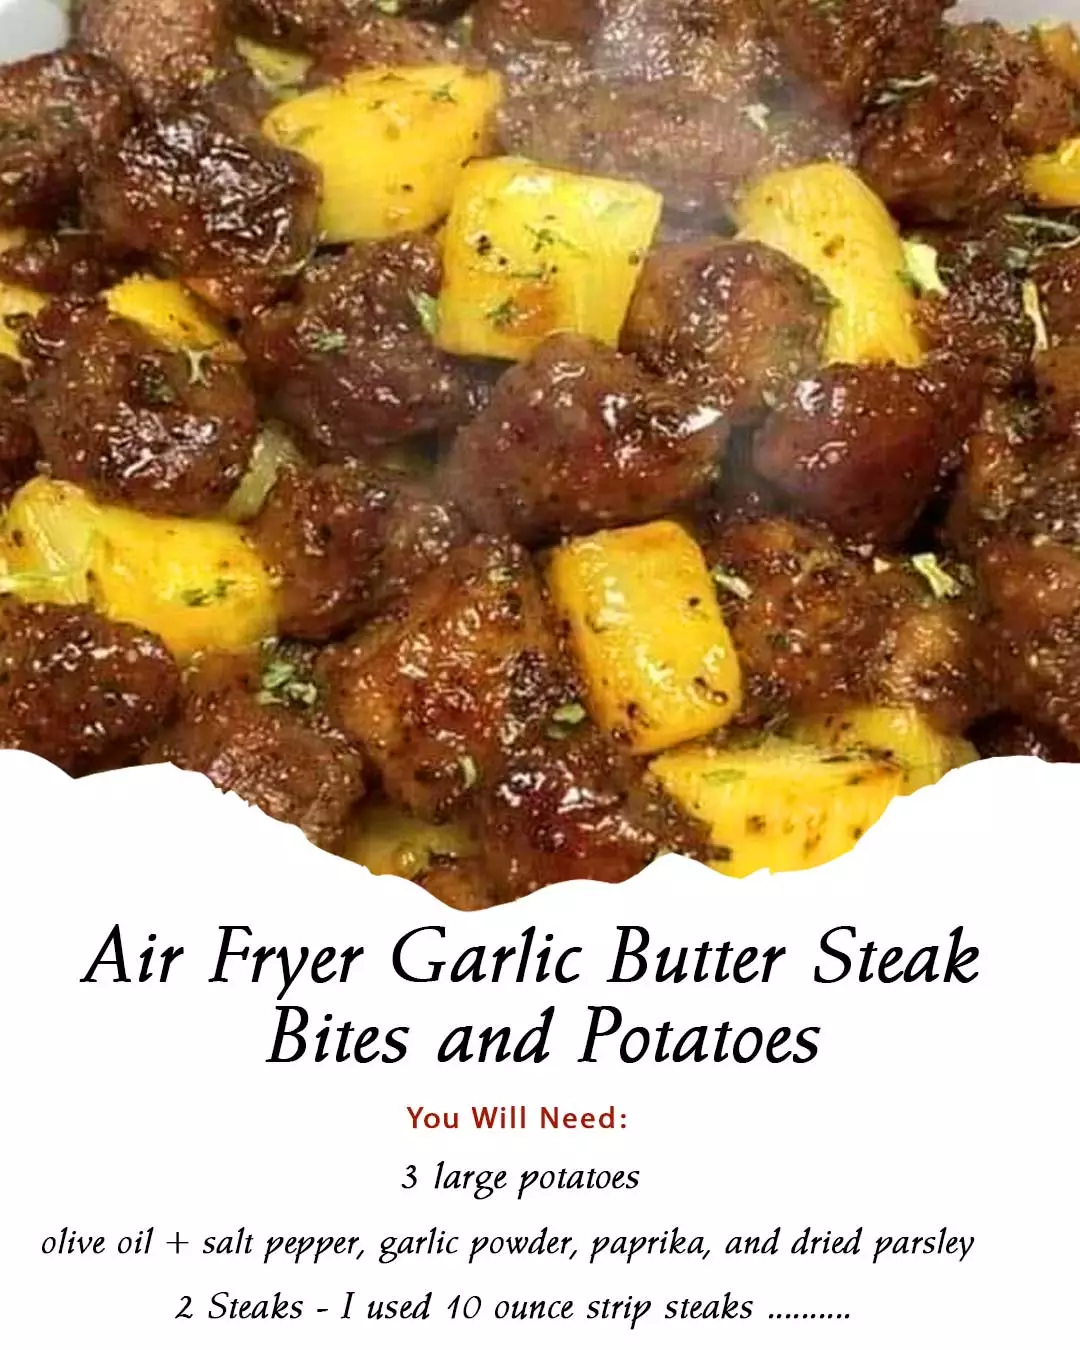 You are currently viewing Air Fryer Garlic Butter Steak Bites and Potatoes